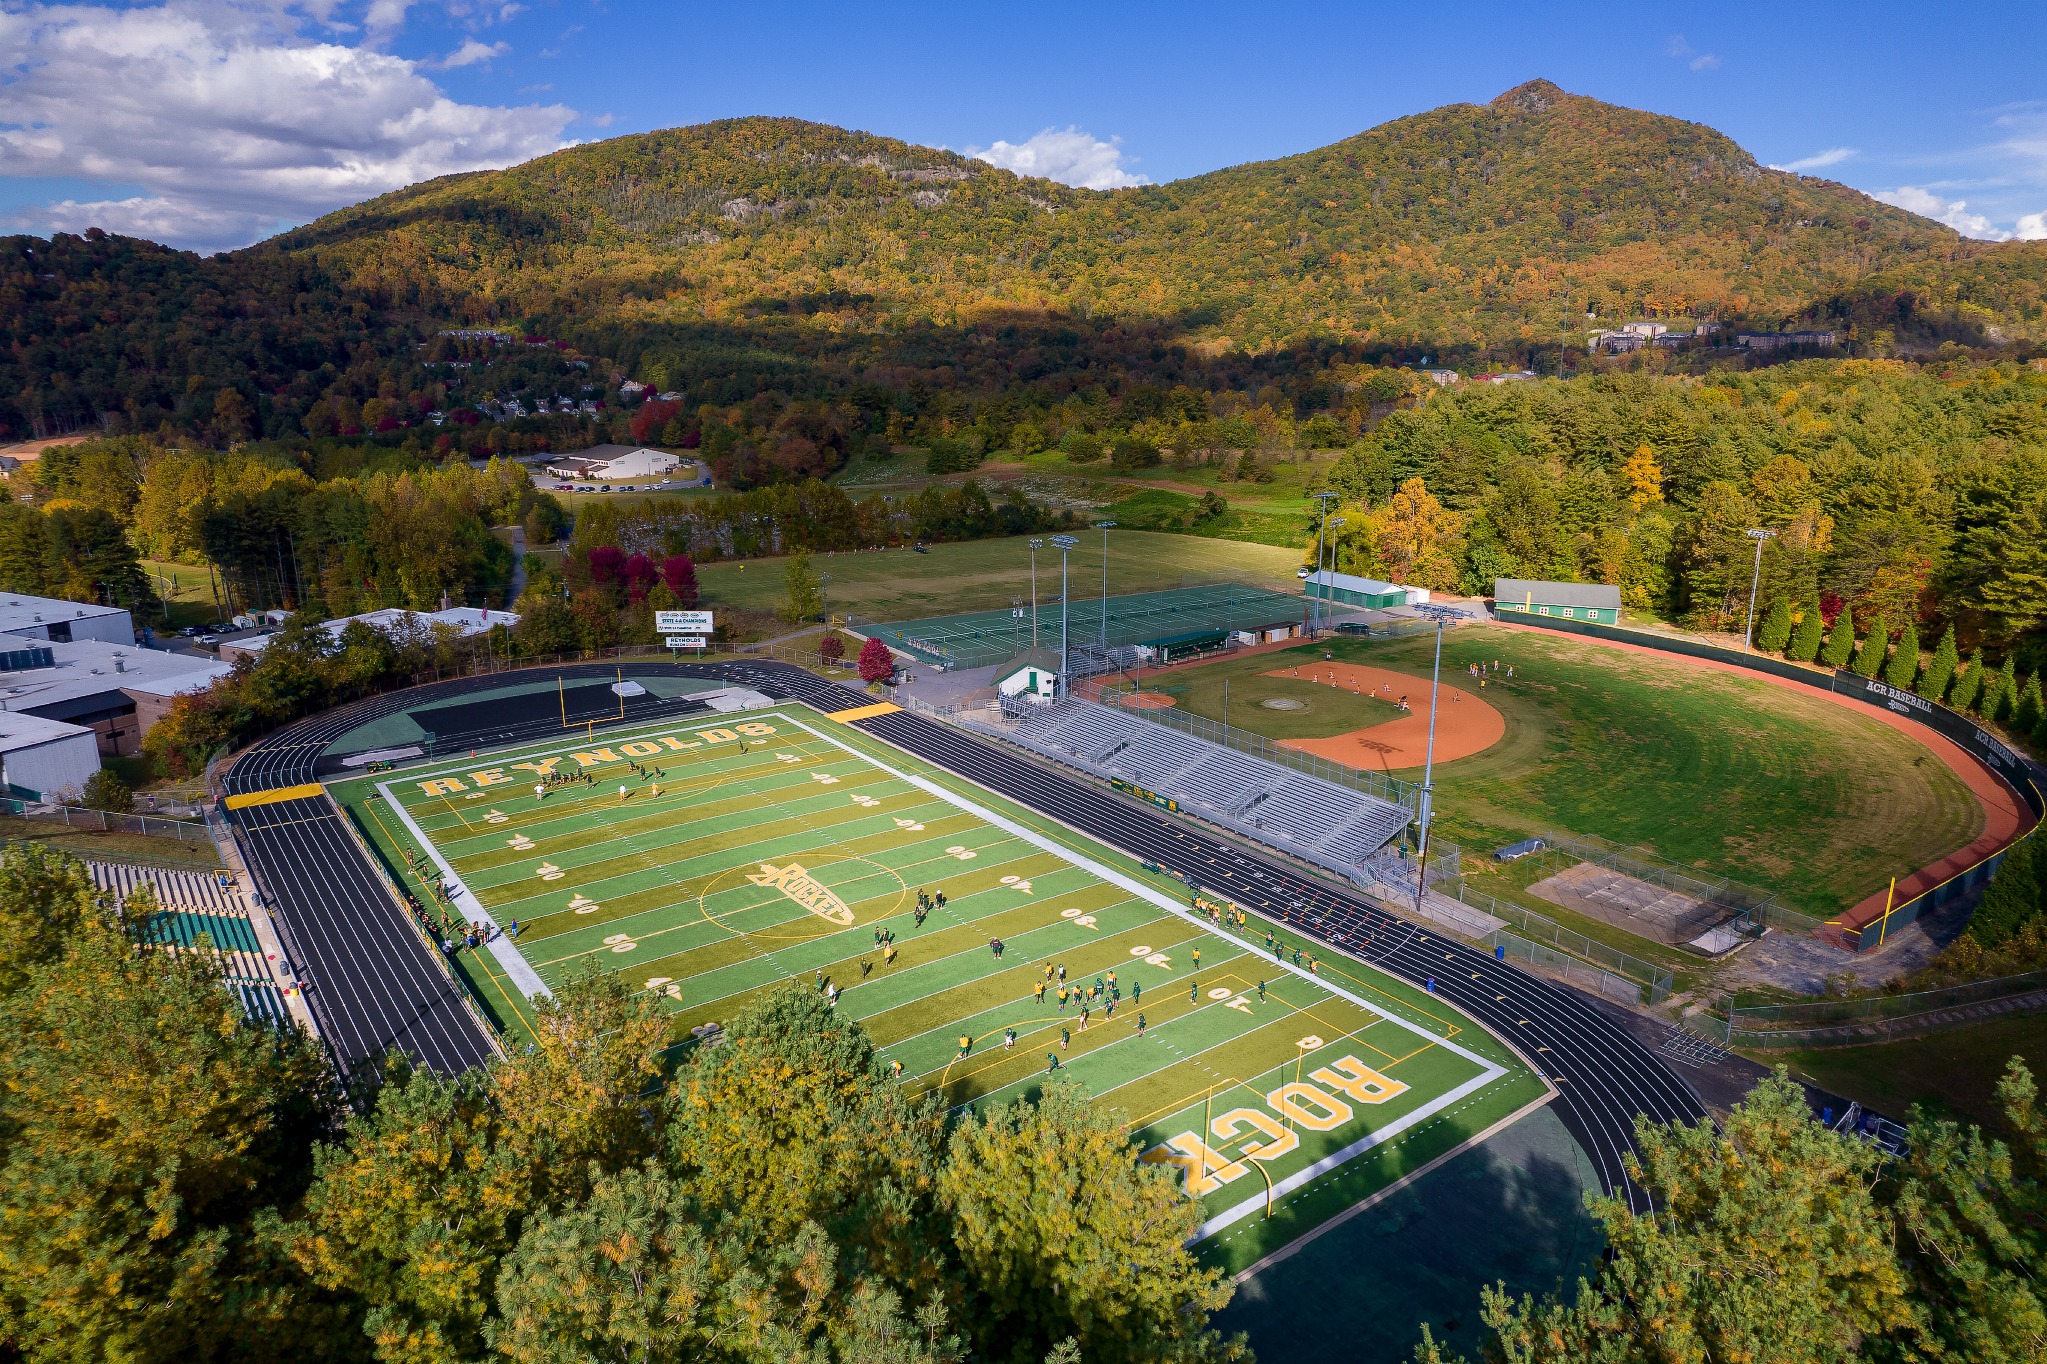 Drone footage of the football field in the fall.